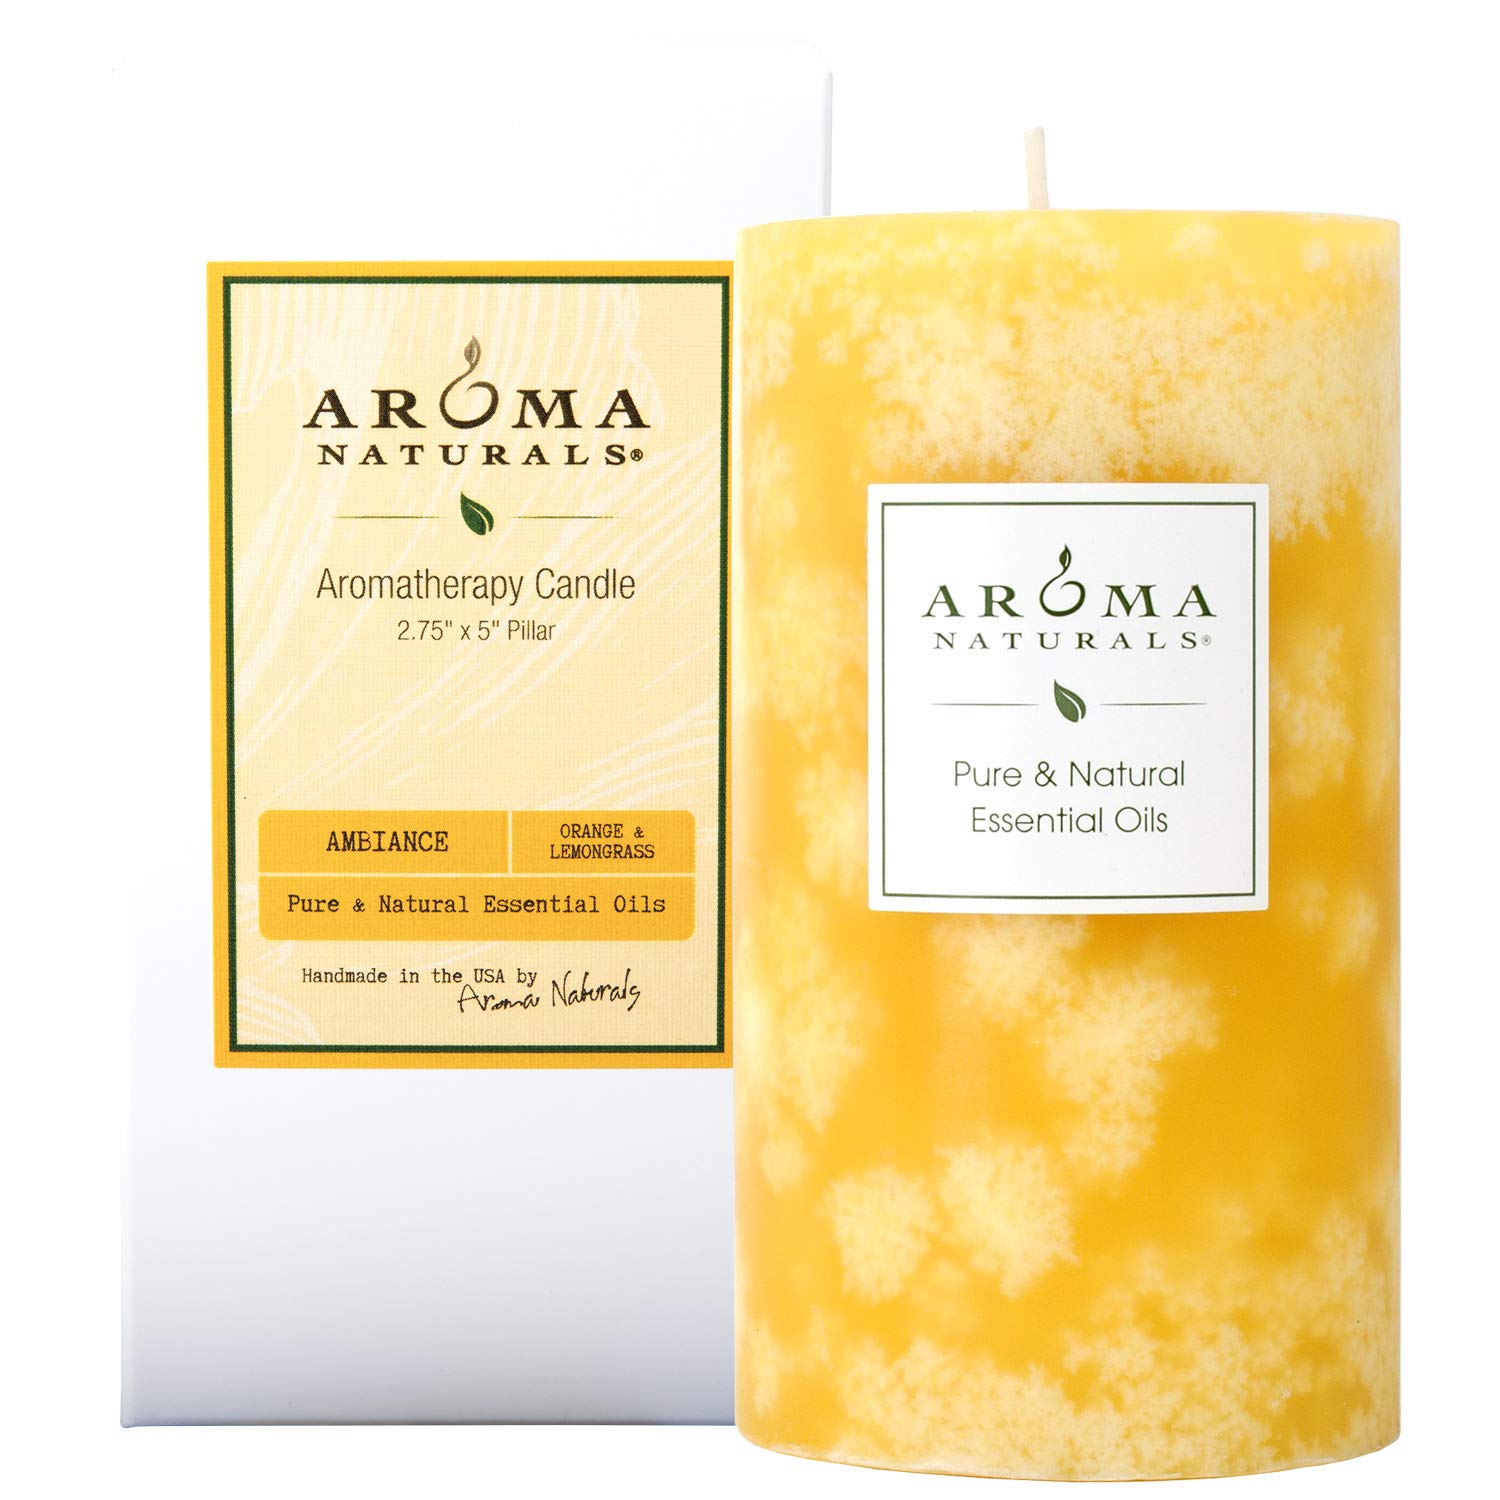 Aroma Naturals Orange and Lemongrass Essential Oil Scented Pillar Candle, Ambiance, 2.75 inch x 5 inch, Yellow